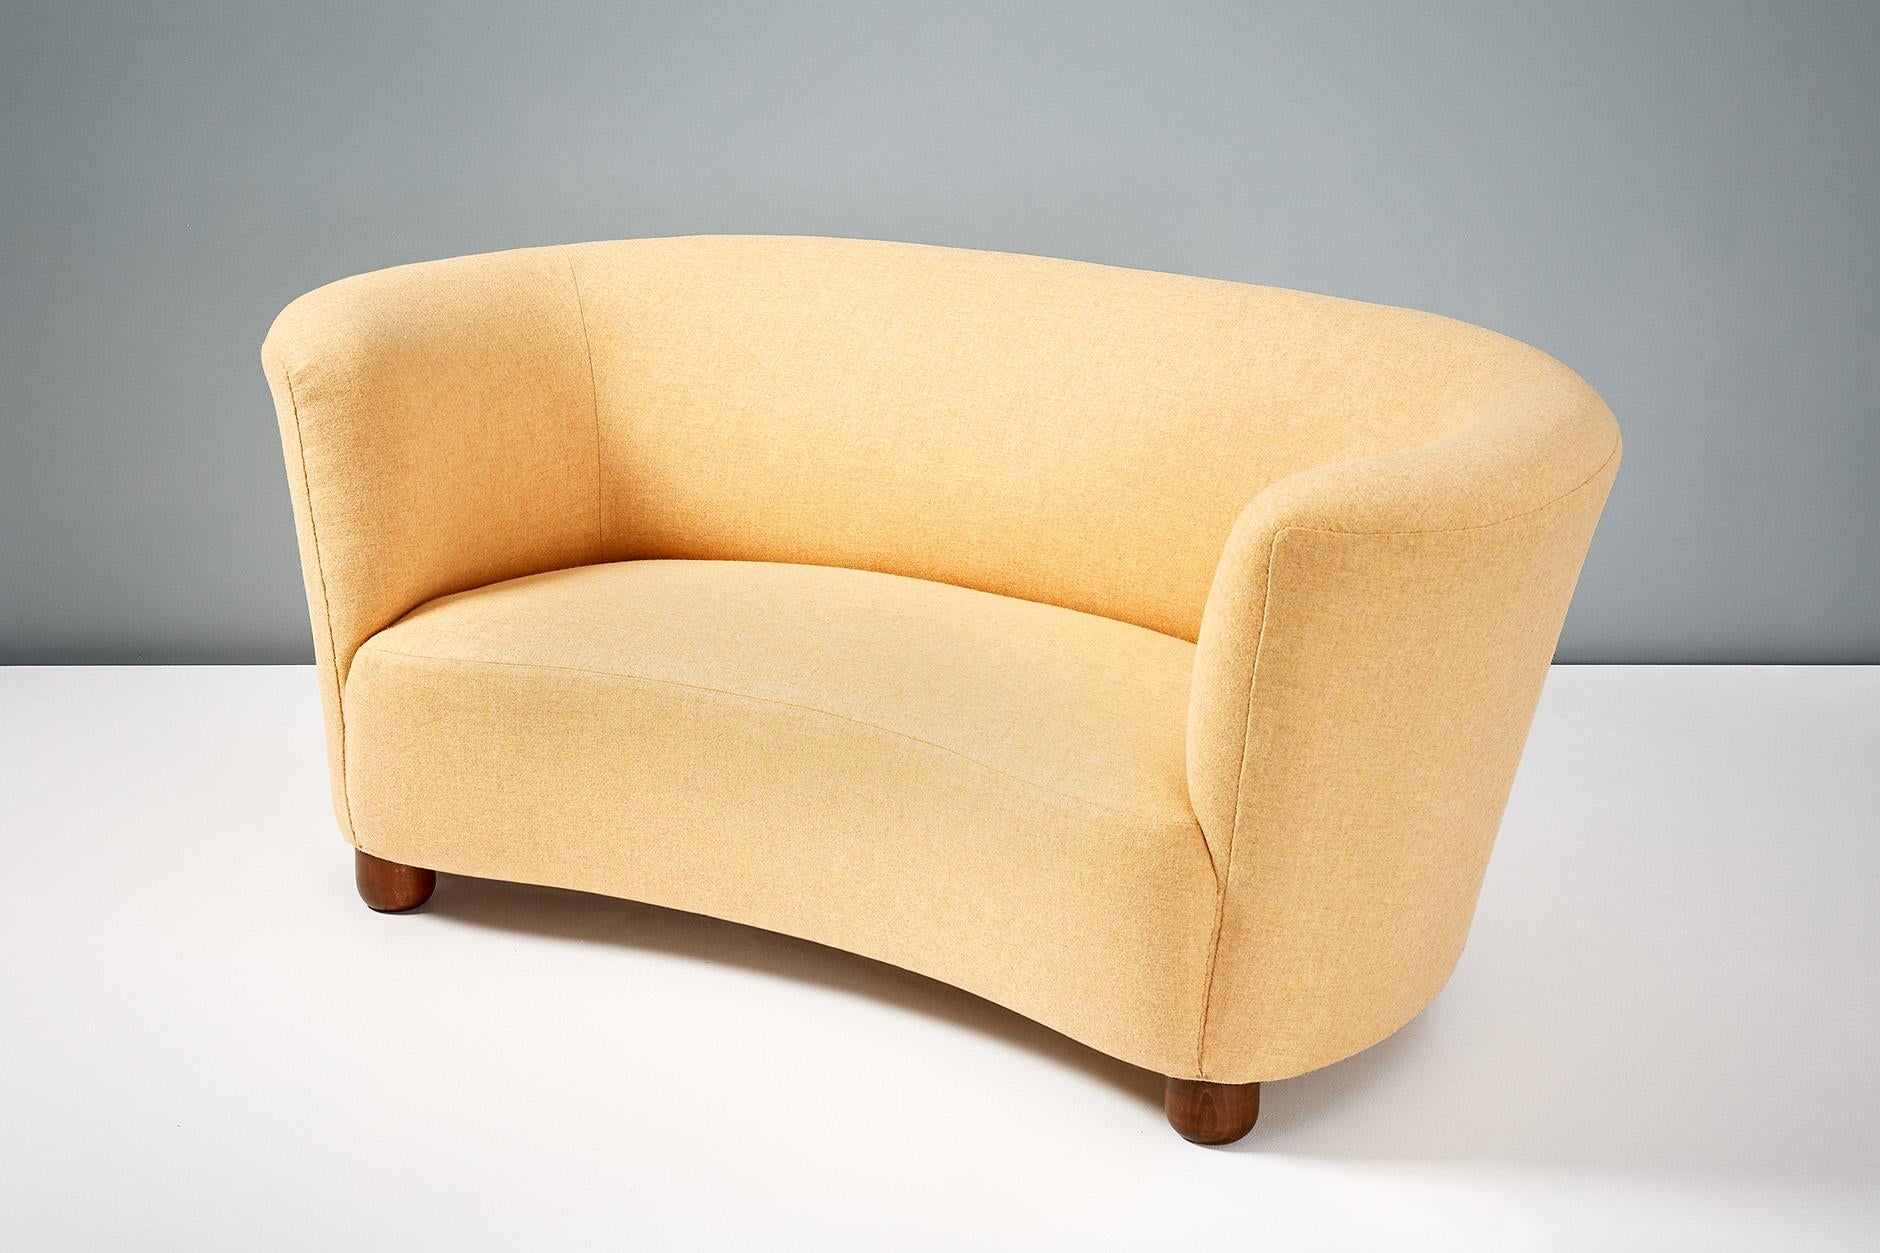 Danish cabinetmaker made banana sofa, circa 1940s.

Produced in Denmark in the 1940s with stained beech legs and new lemon yellow wool felt fabric. The sofa has been completely reconditioned at our London workshops with new springs, foam and